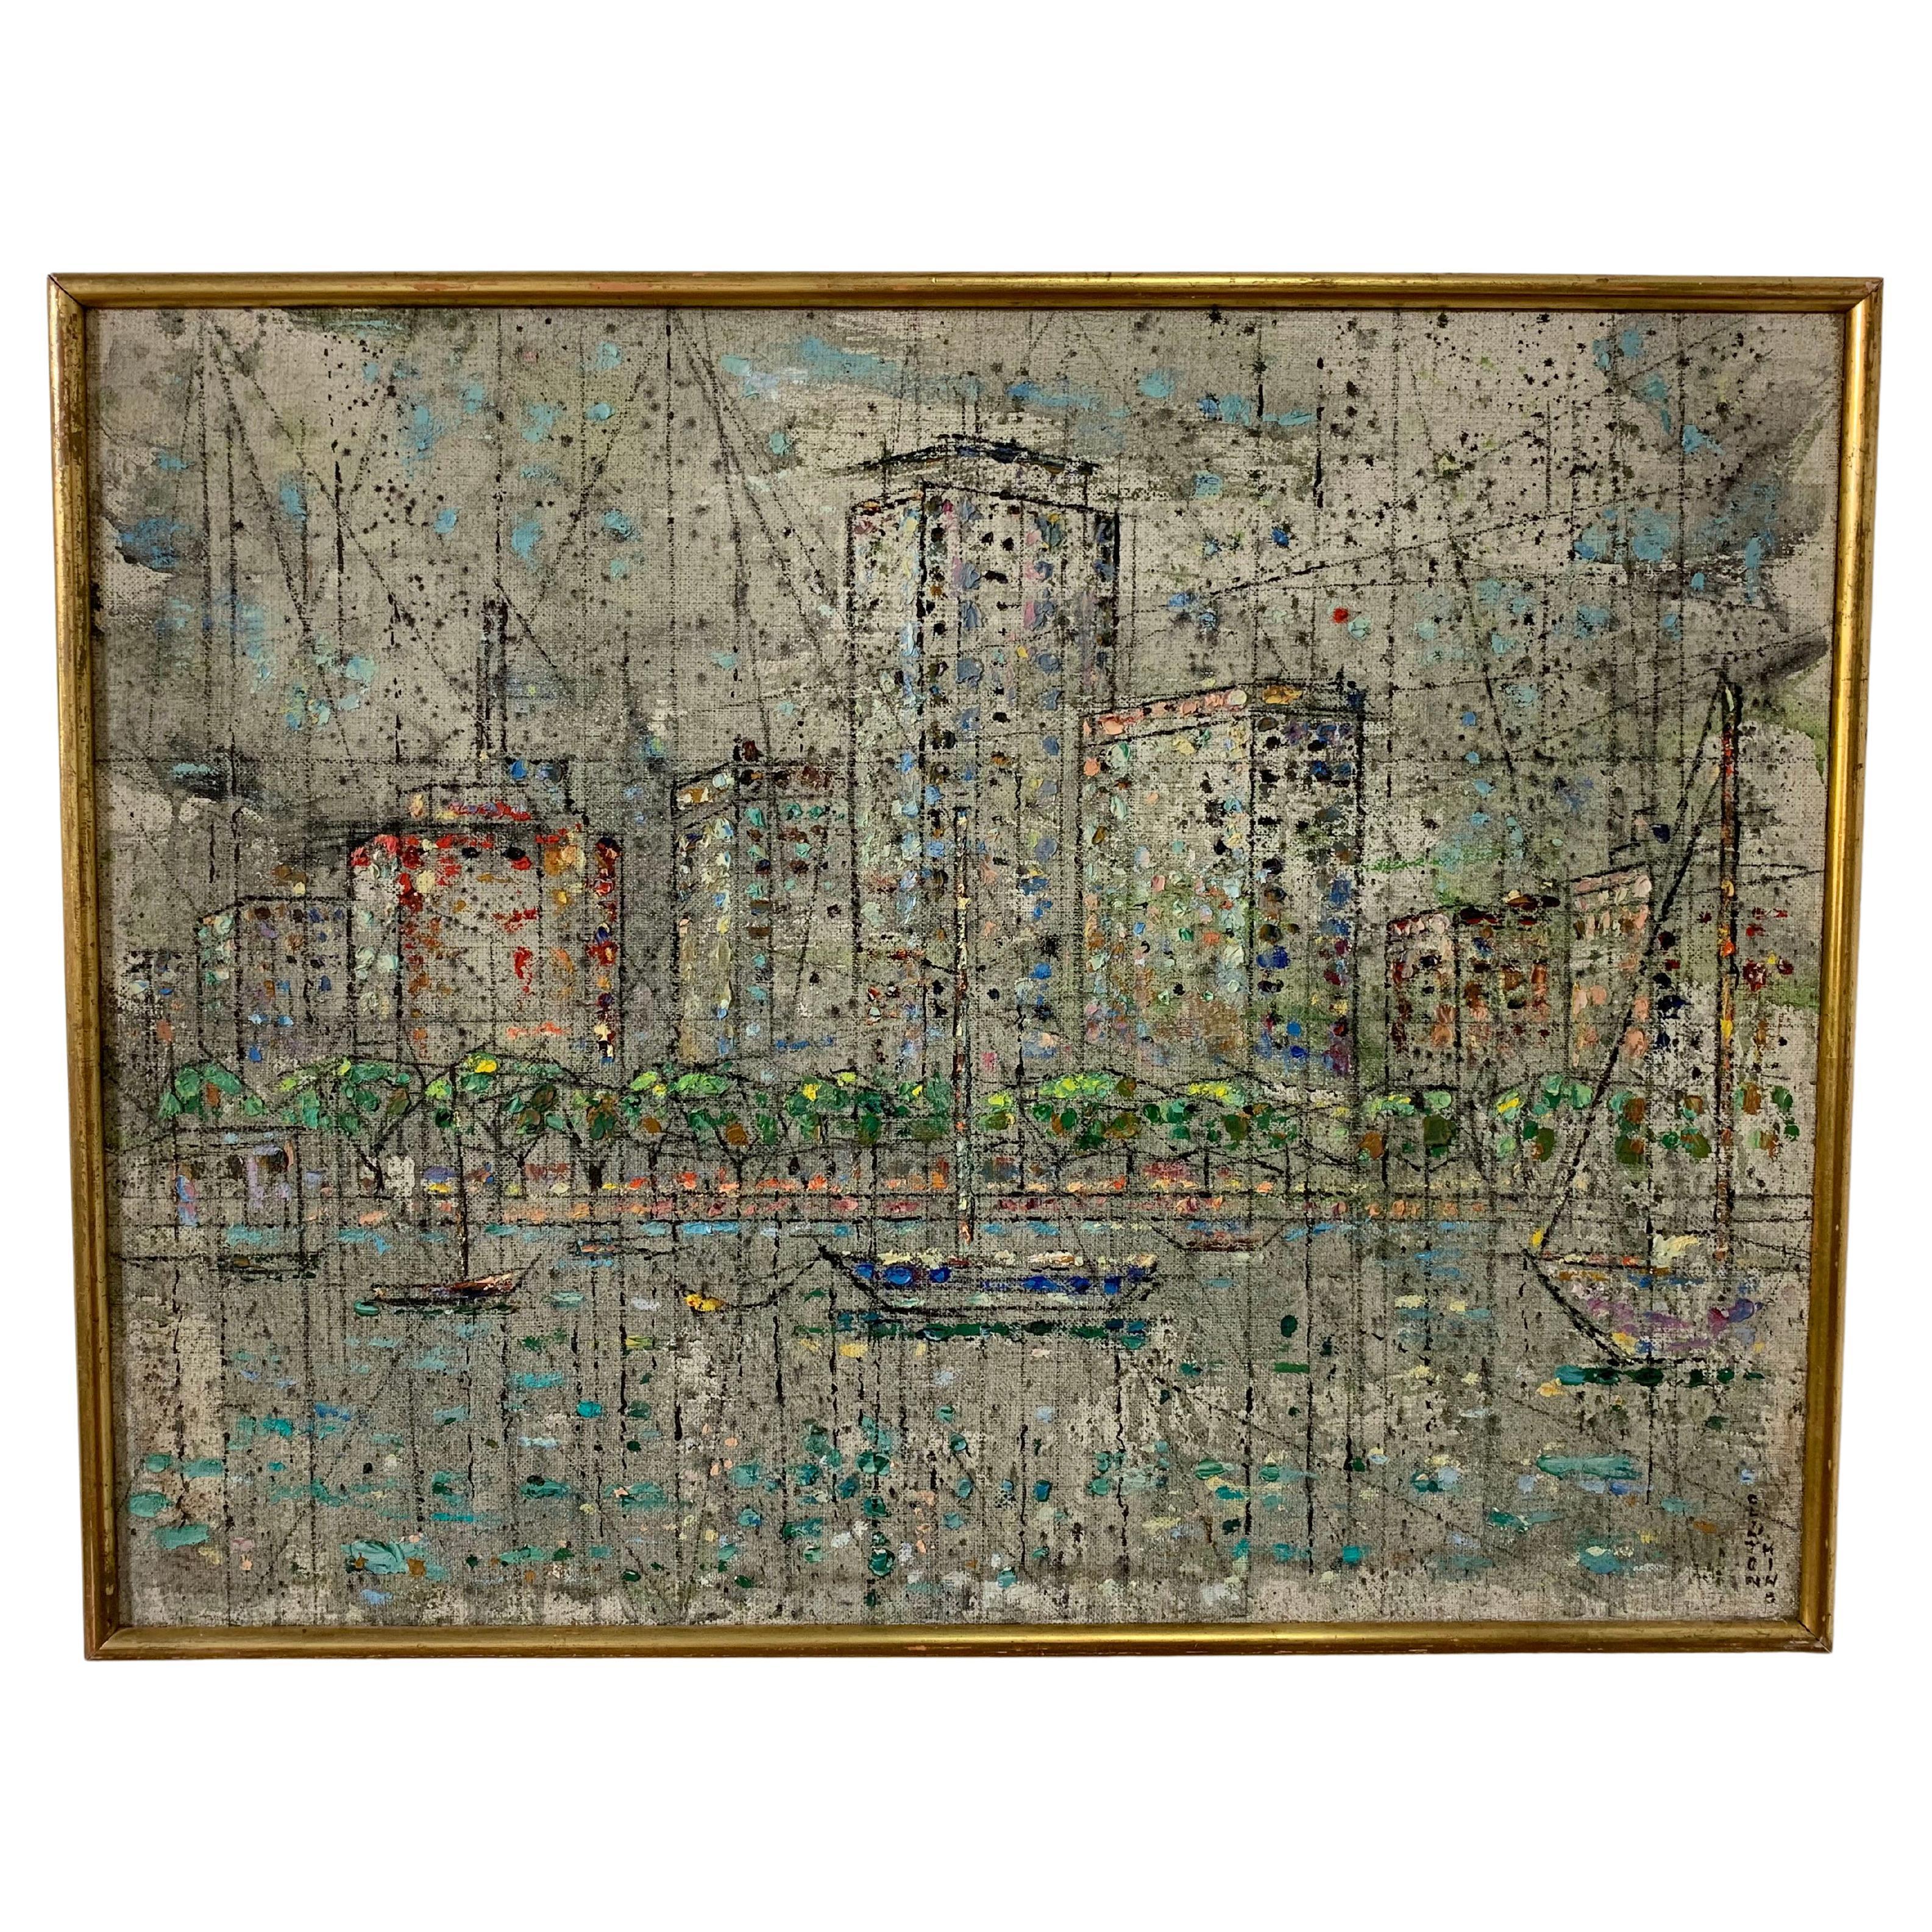 Modernist Oil of the Chicago Skyline by Clinton Blair King, Circa 1950s